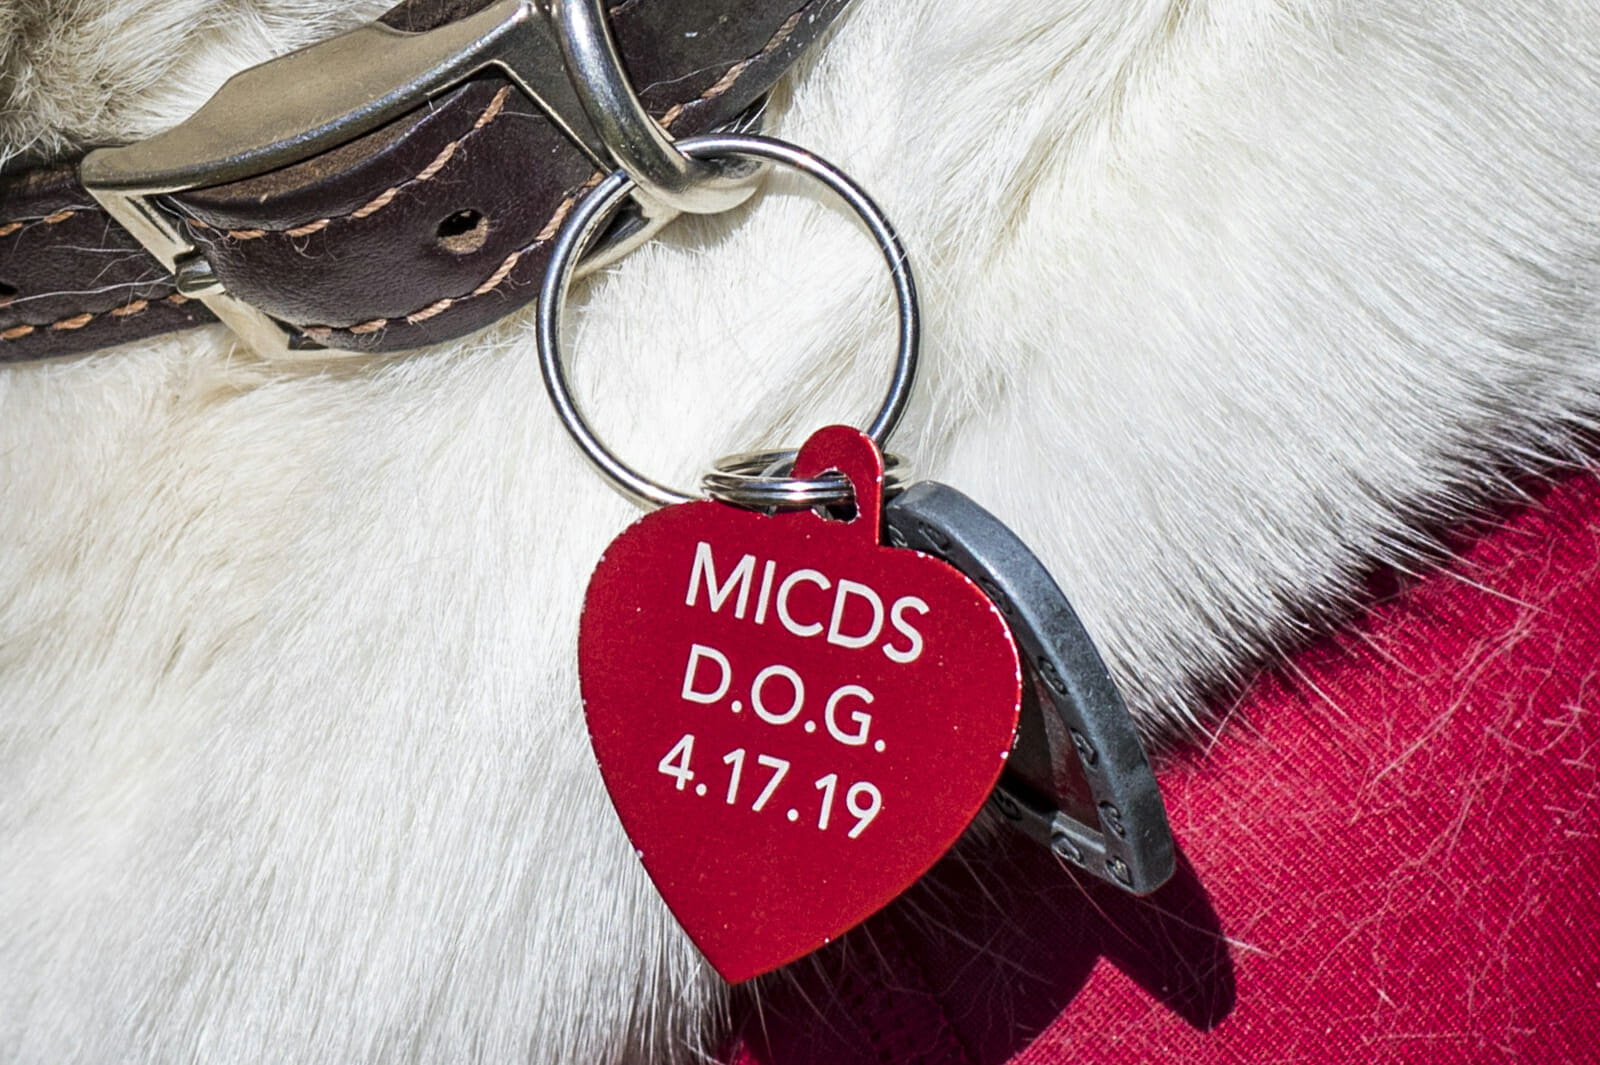 MICDS dog Ellie shares what she discovered about the MICDS Fund.